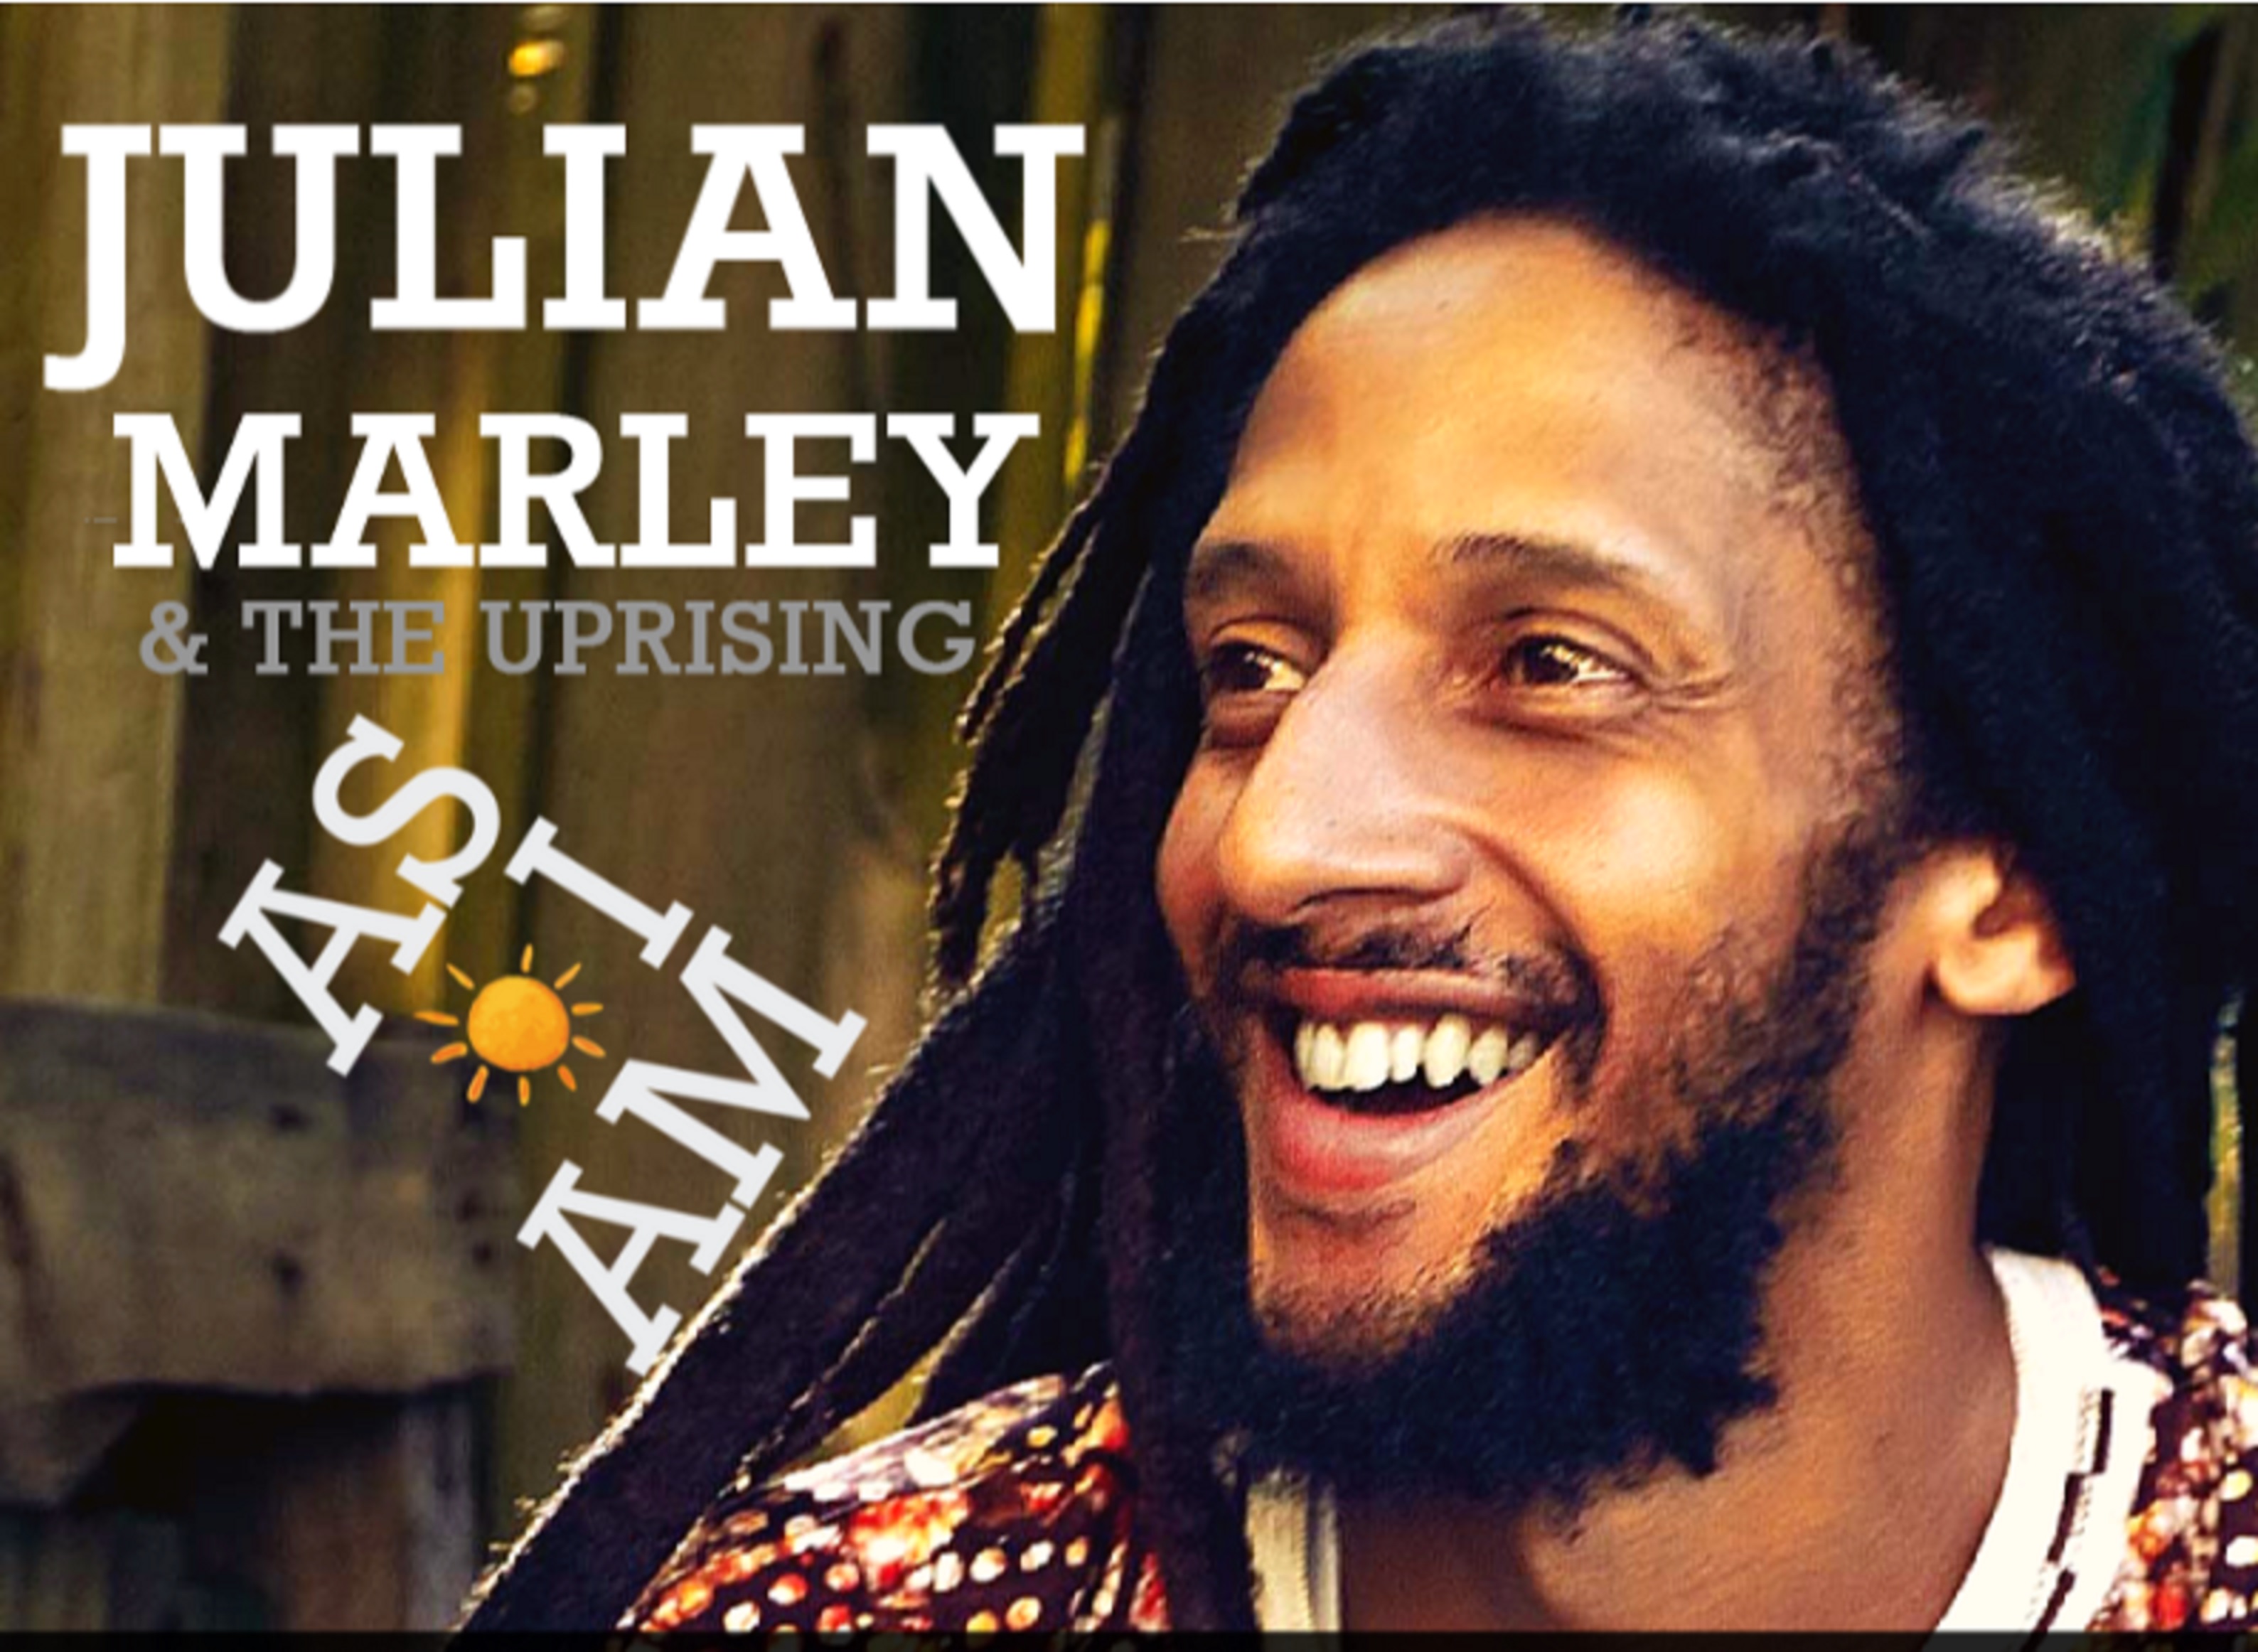 Julian Marley's East Coast Tour, in Support of New Album, "As I Am"